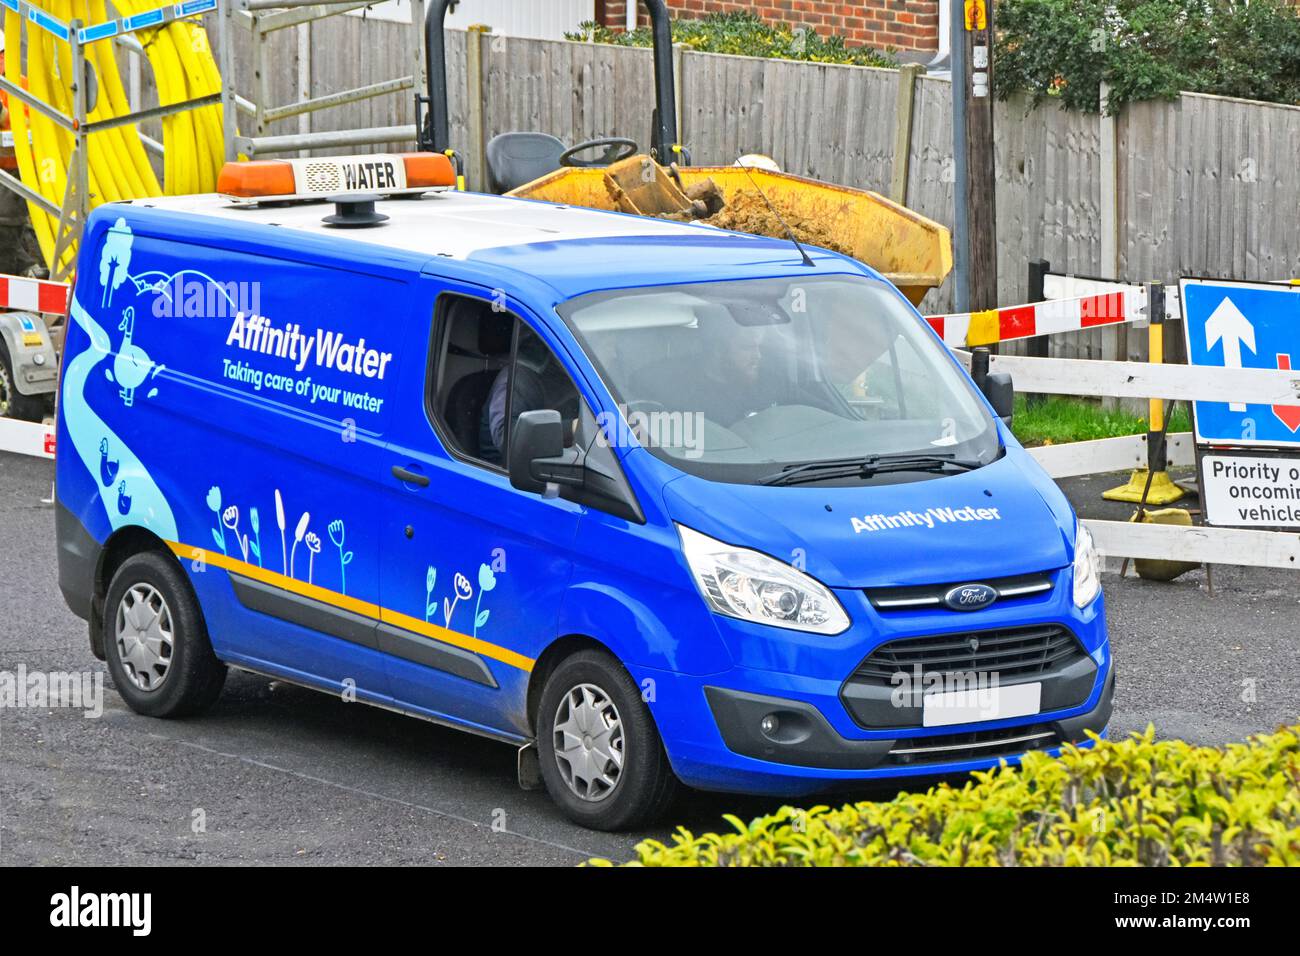 Side & front view Affinity Water supply company business Ford van in residential street driving past gas main replacement road works Essex England UK Stock Photo